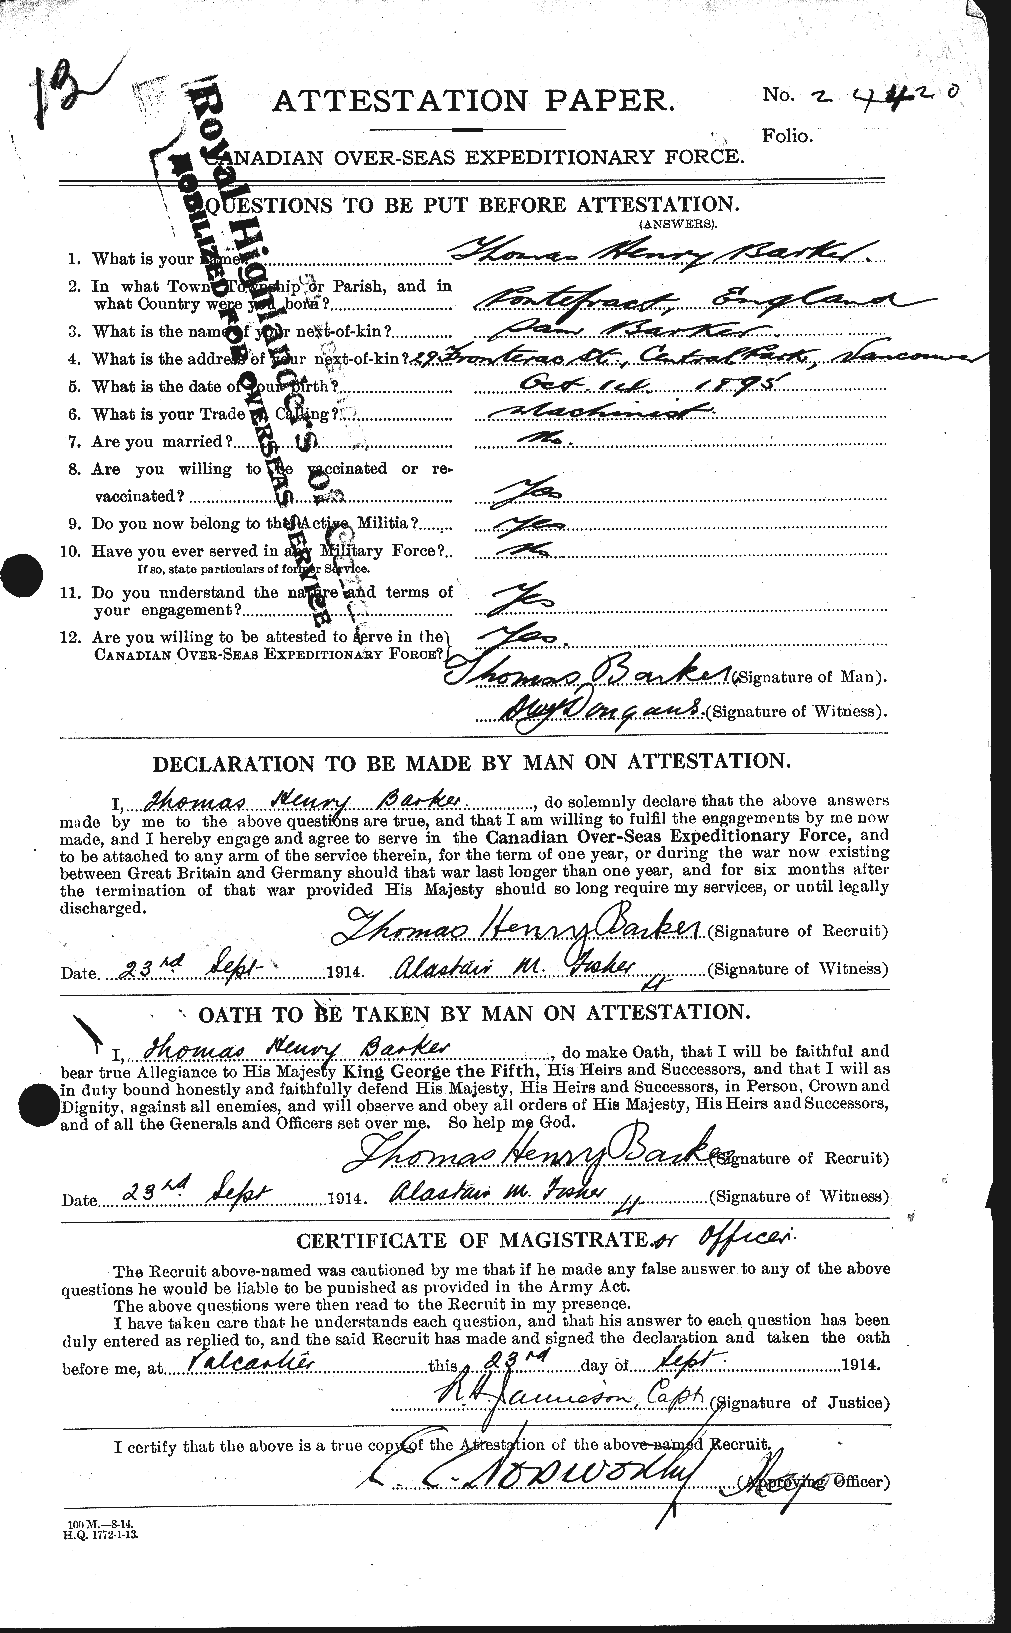 Personnel Records of the First World War - CEF 226931a